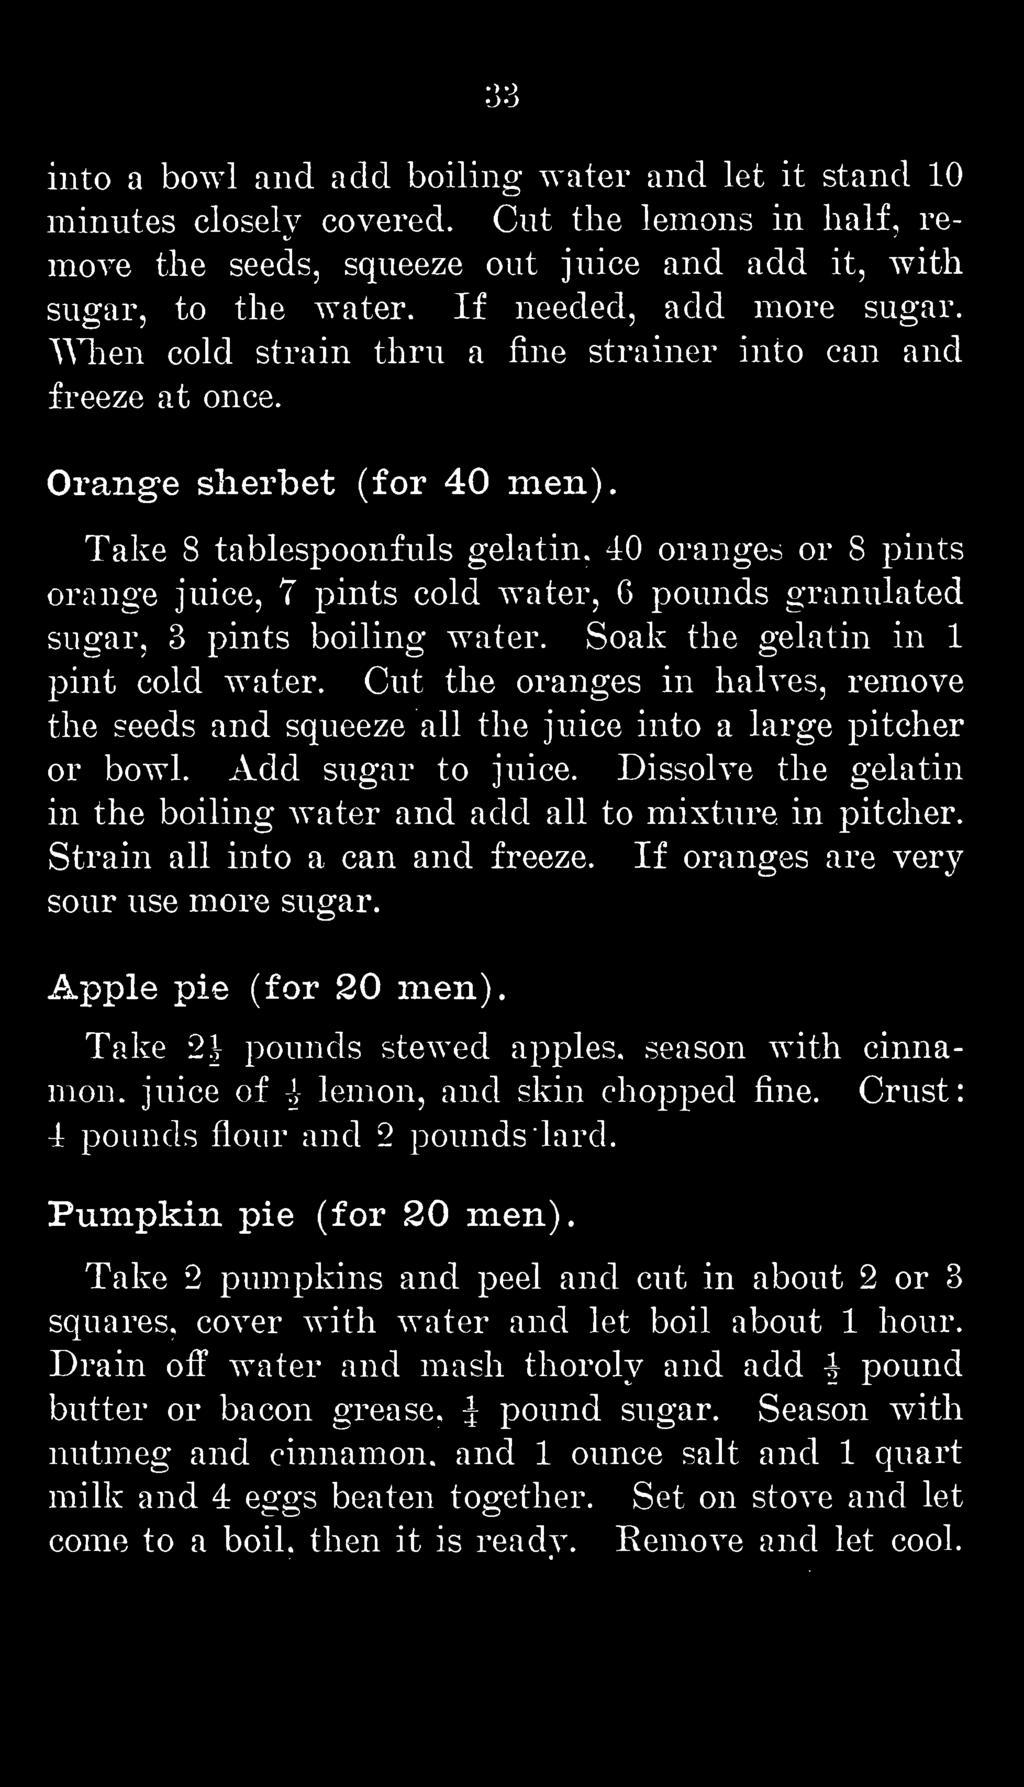 Strain all into a can and freeze. If oranges are very sour use more sugar. Apple pie (for 20 men). Take 2} pounds stewed apples, season with cinnamon, juice of I lemon, and skin chopped fine.